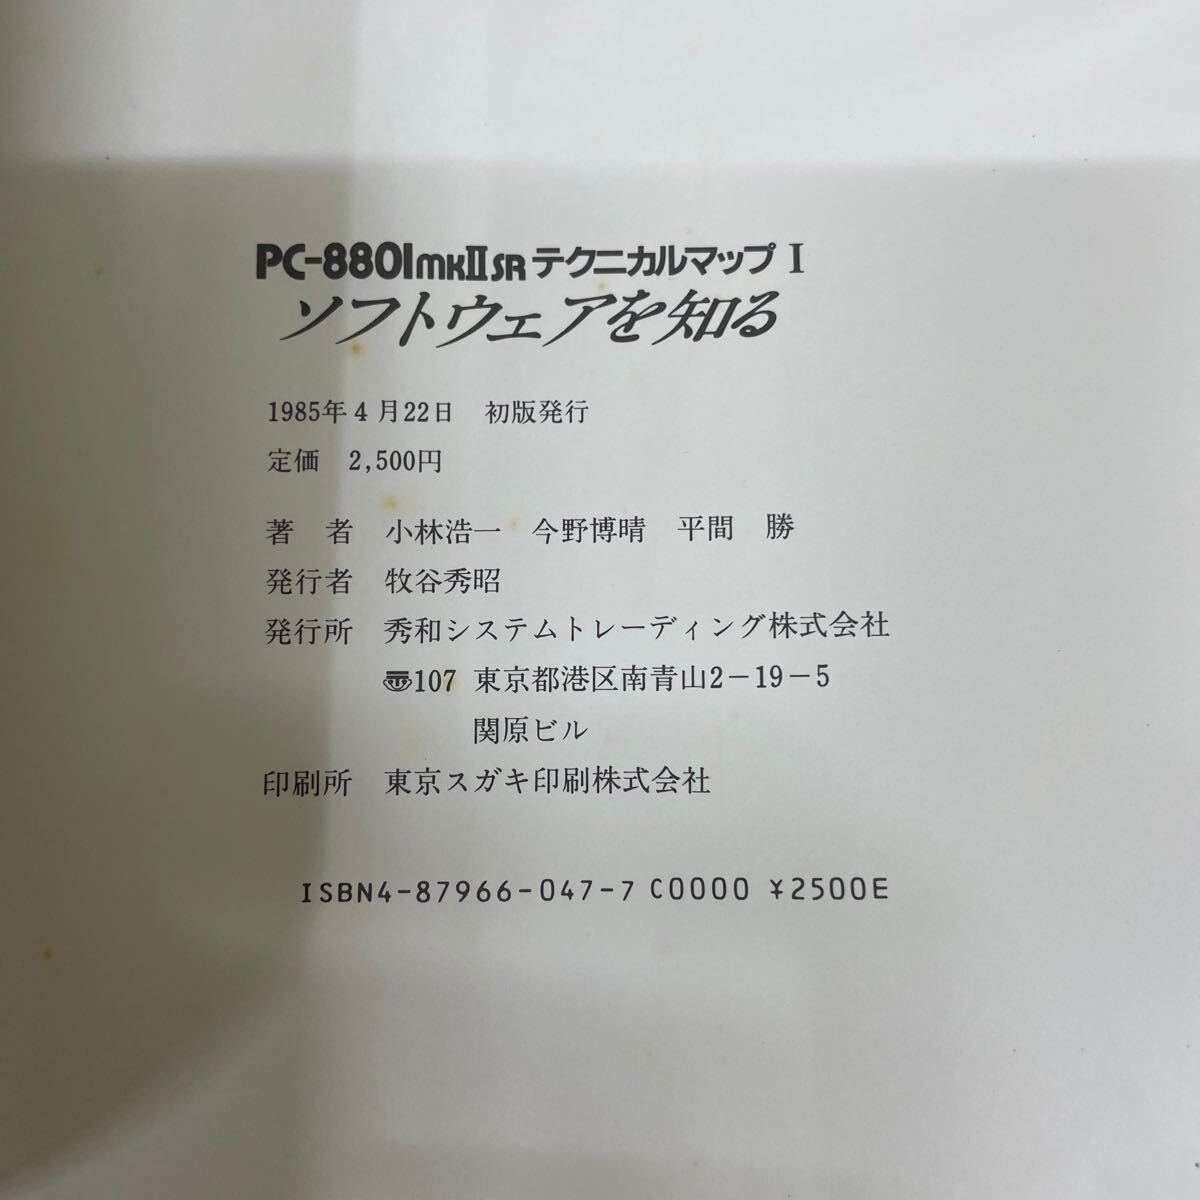 PC-8801mkⅡSR Technica ru map Ⅰ software . know Kobayashi . one / now .../ flat interval ./ work 1985 year / secondhand book / cover reverse side some stains / small .. inside scorch some stains / see .nodo break up 